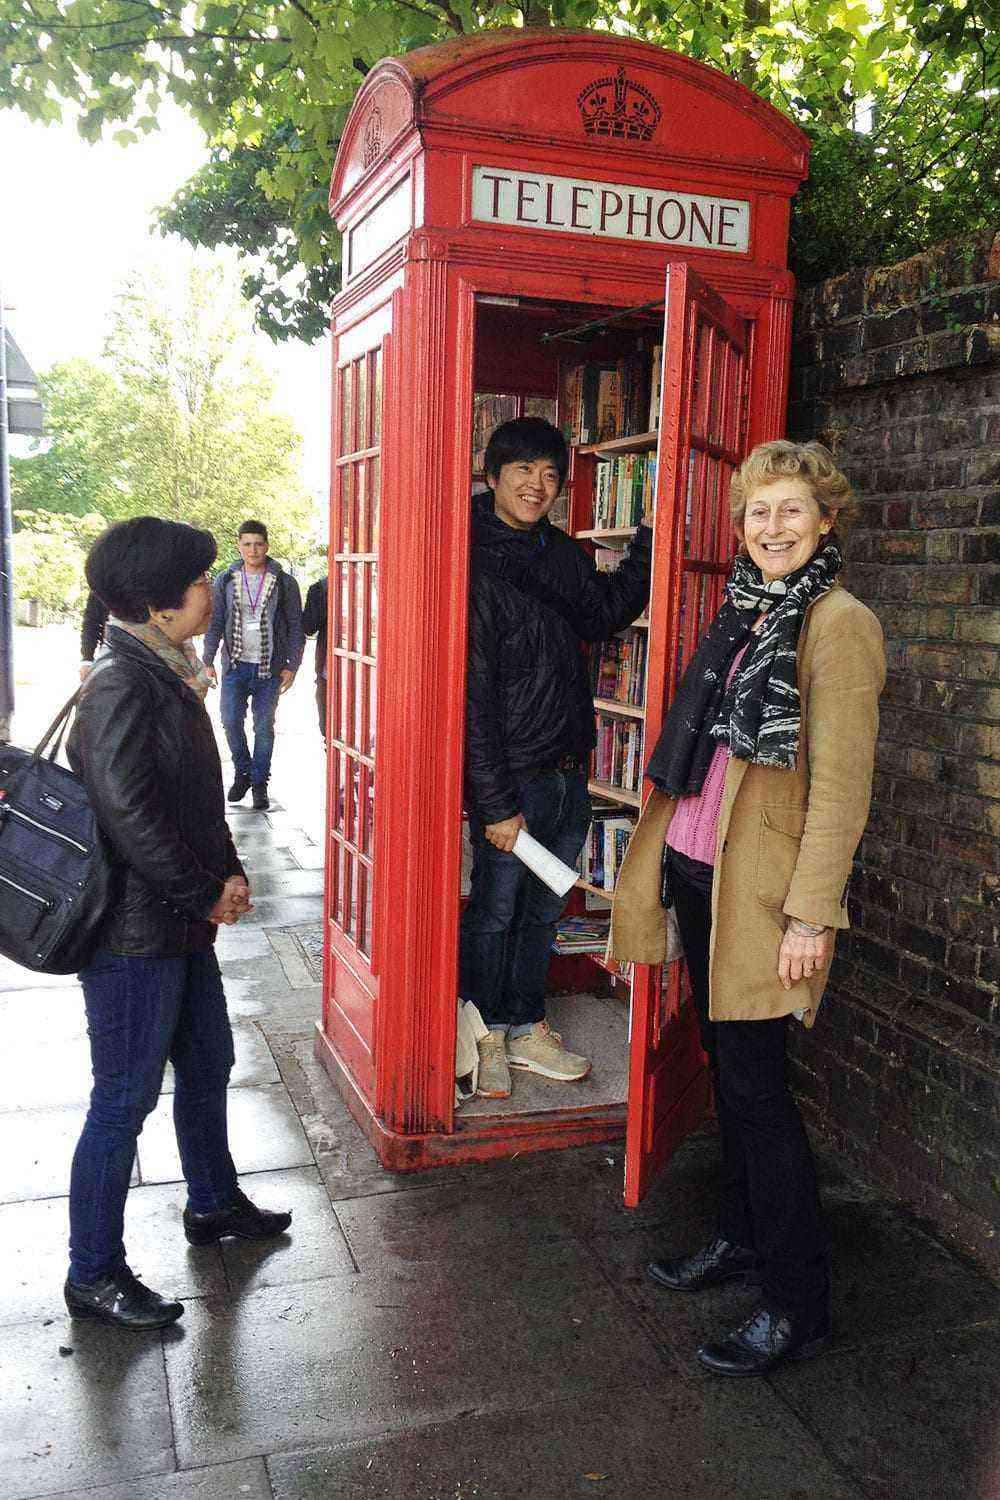 Mini lending libraries in disused phone boxes can be found across Britain. In London, Lewisham Micro library is one of the country’s most-loved. Accessible 24 hours a day, the library is open to all. “All we ask,” says the operator, “is if you take a book to read, please replace with an old book of your own if you can.” The library’s Facebook page updates users on notable books currently in stock.